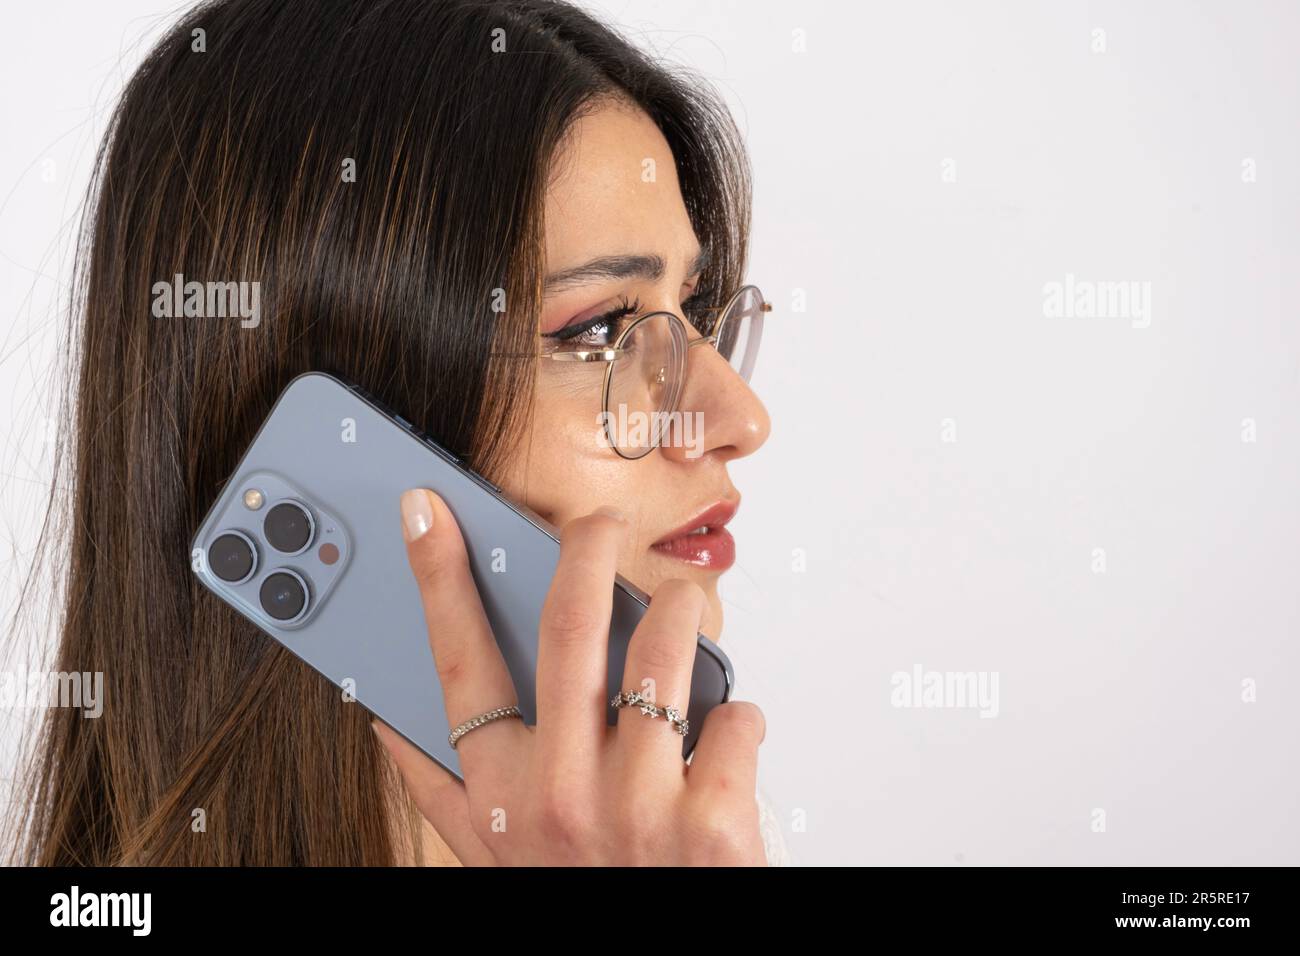 Close up side view image of woman talking on the phone. Holding modern blue three camera smartphone. Seriously looking copy space. Stock Photo